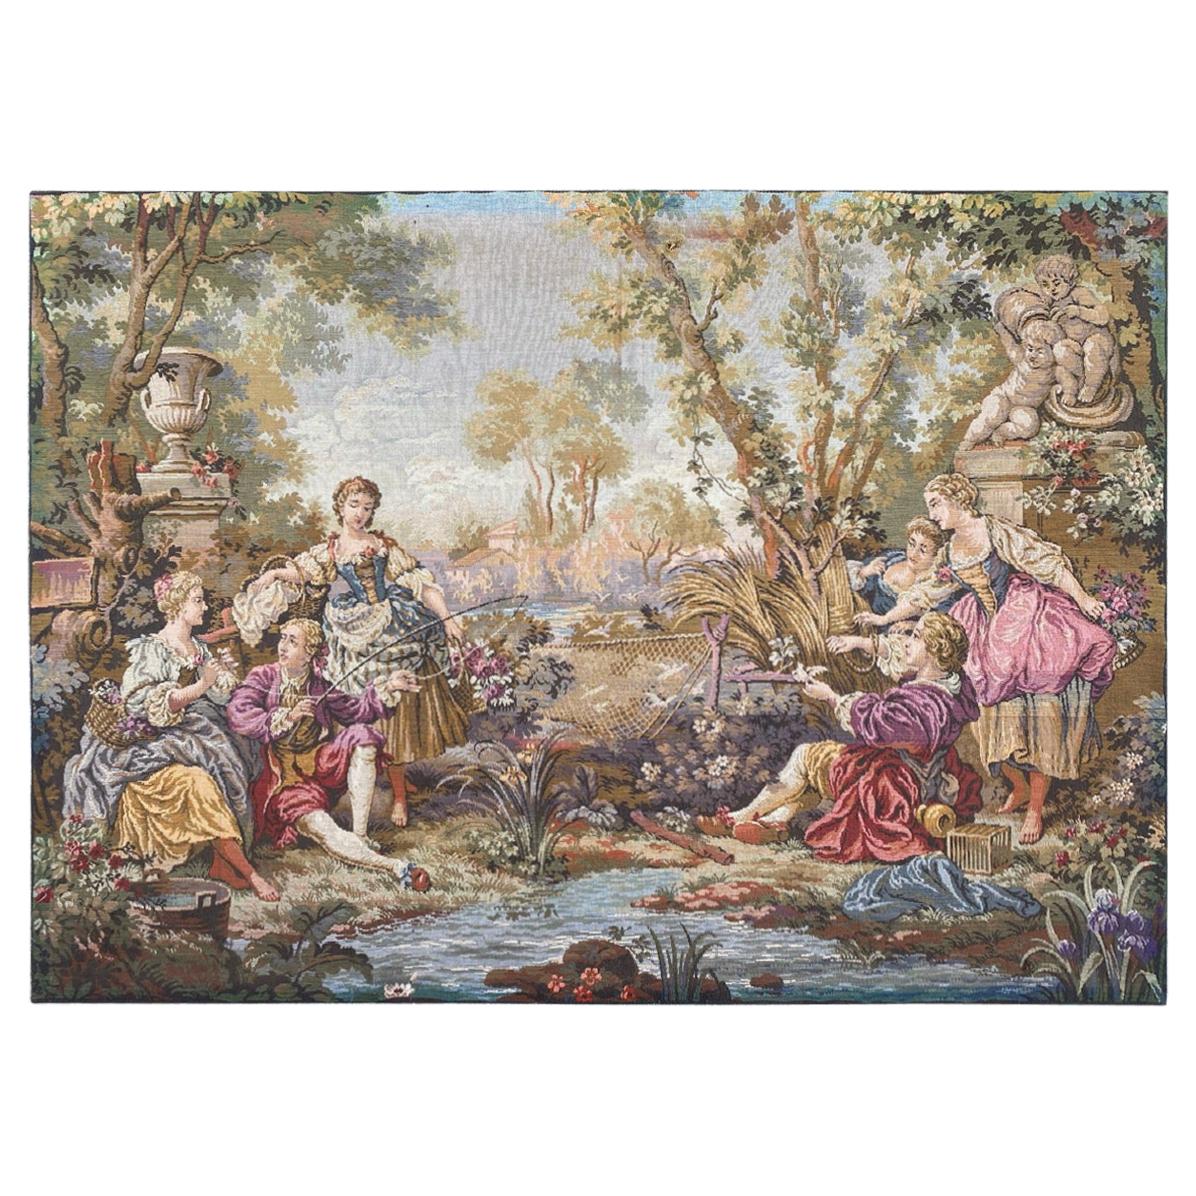 Nice Vintage Aubusson Style Jaquar Tapestry